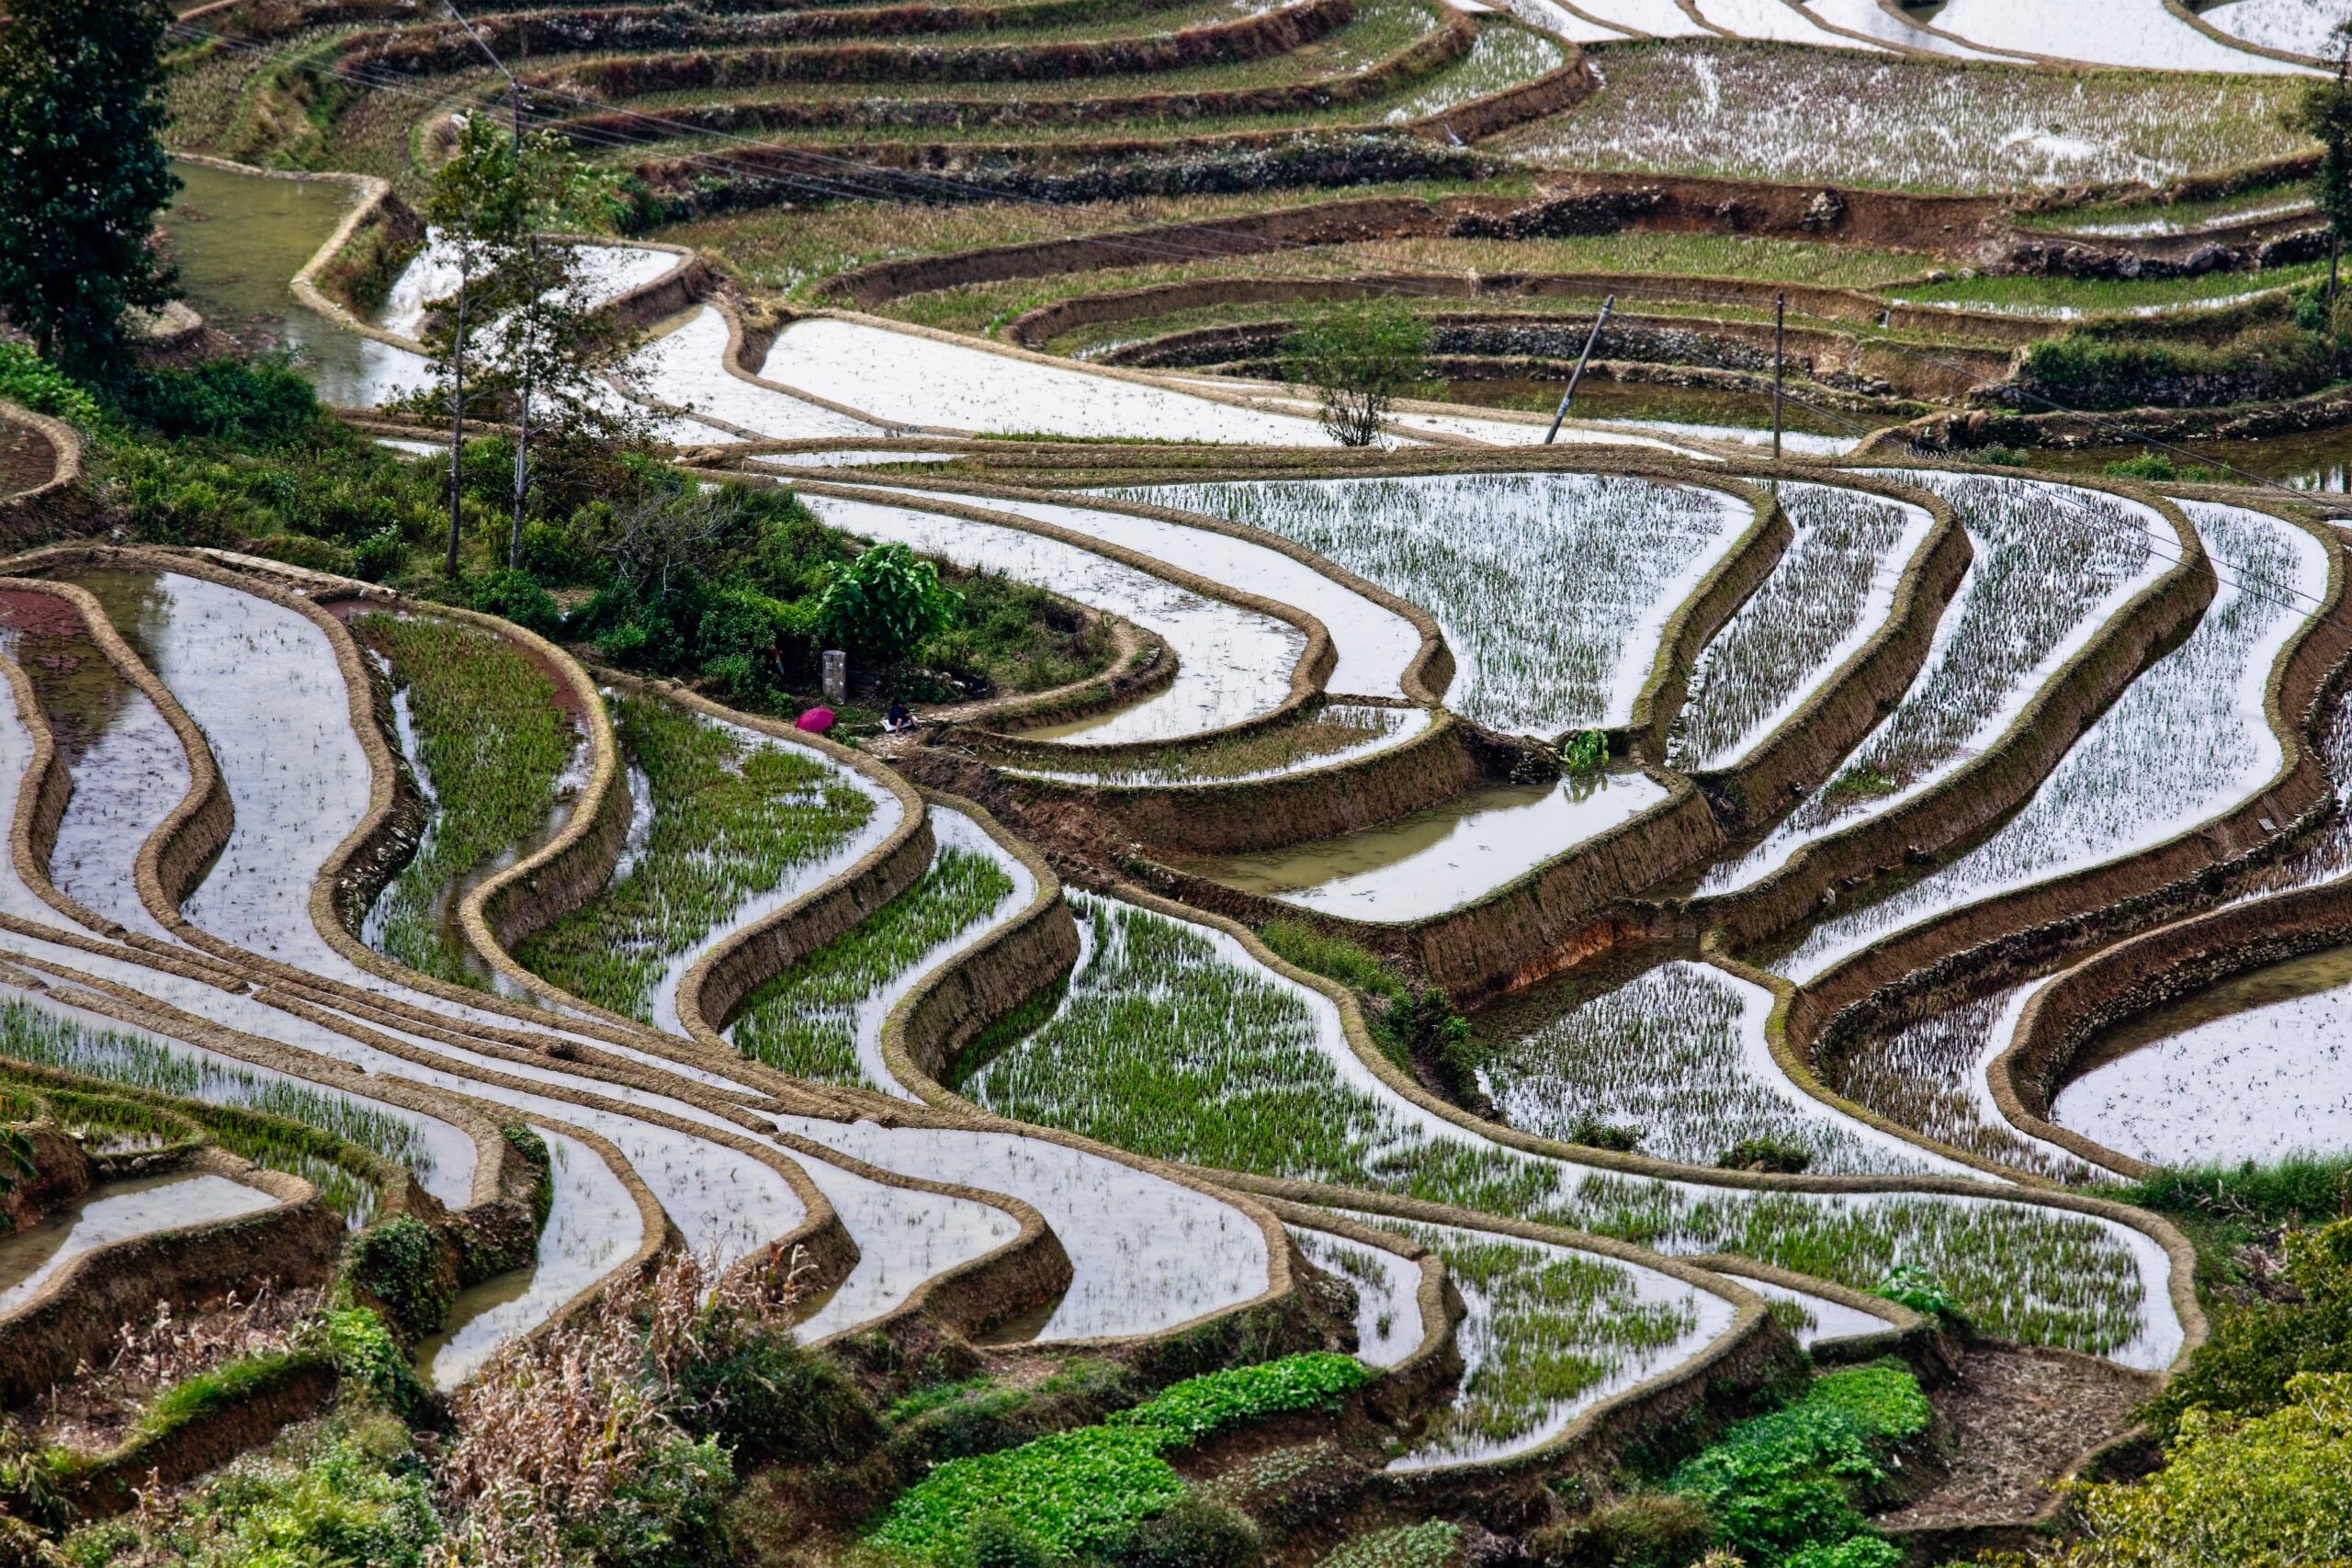 Photo by Vince Russell on Unsplash. Terrace crop cultivation in Yunan province, China.  